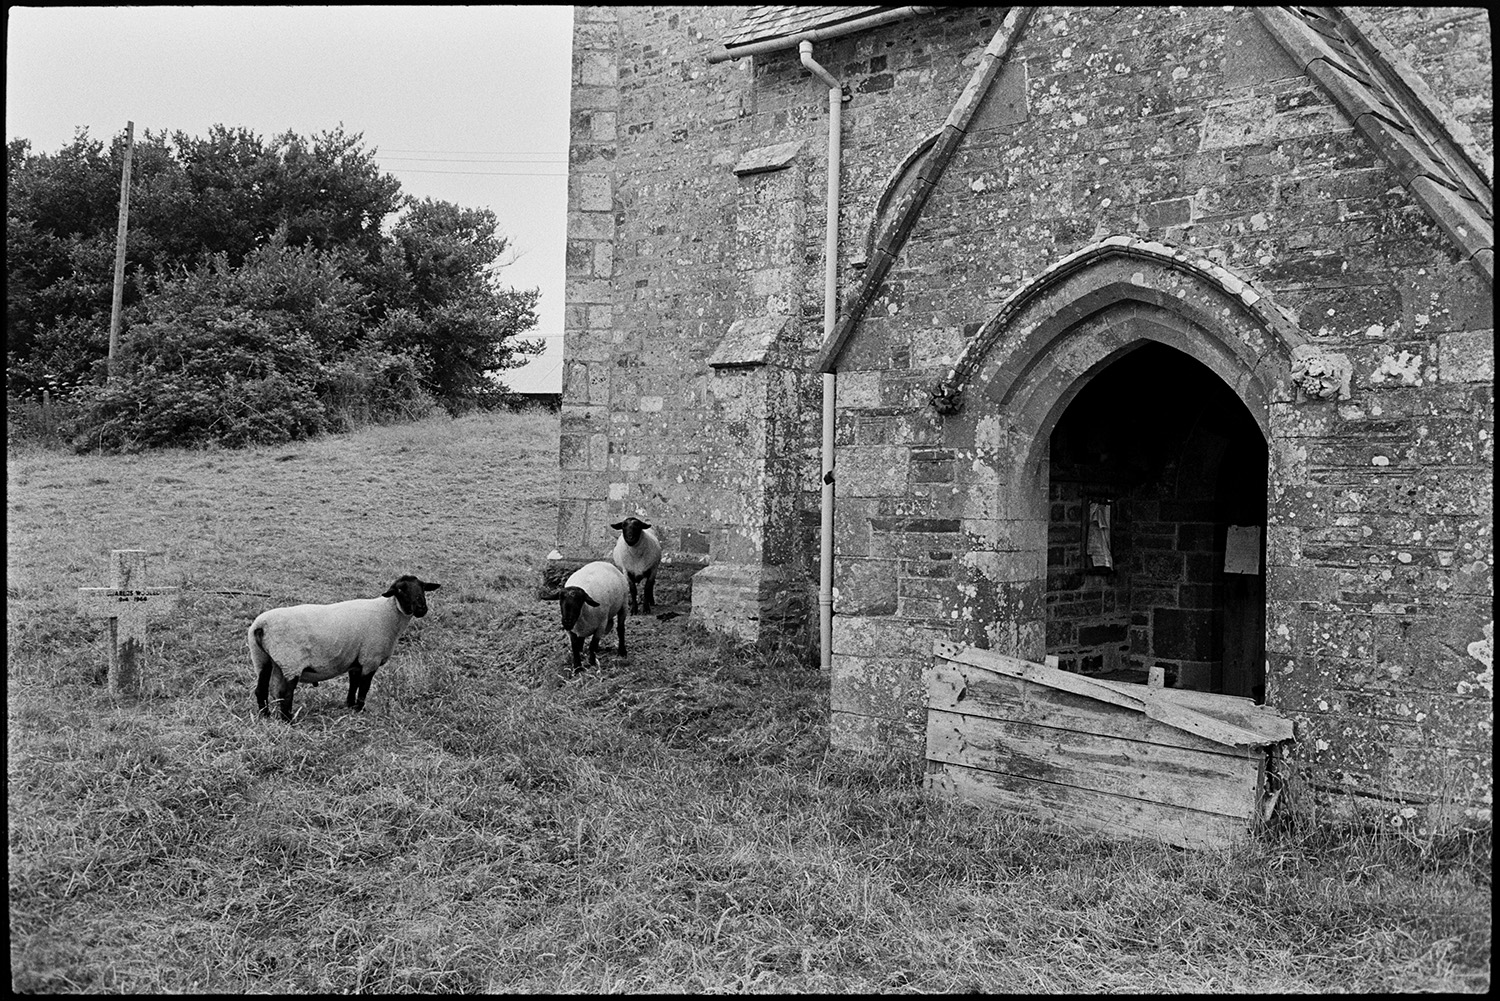 Redundant church, inside and out. 
[Three sheep outside the redundant church at Ashbury, near Northlew. A gravestone is visible in the churchyard and the church porch is blocked up with planks of wood.]